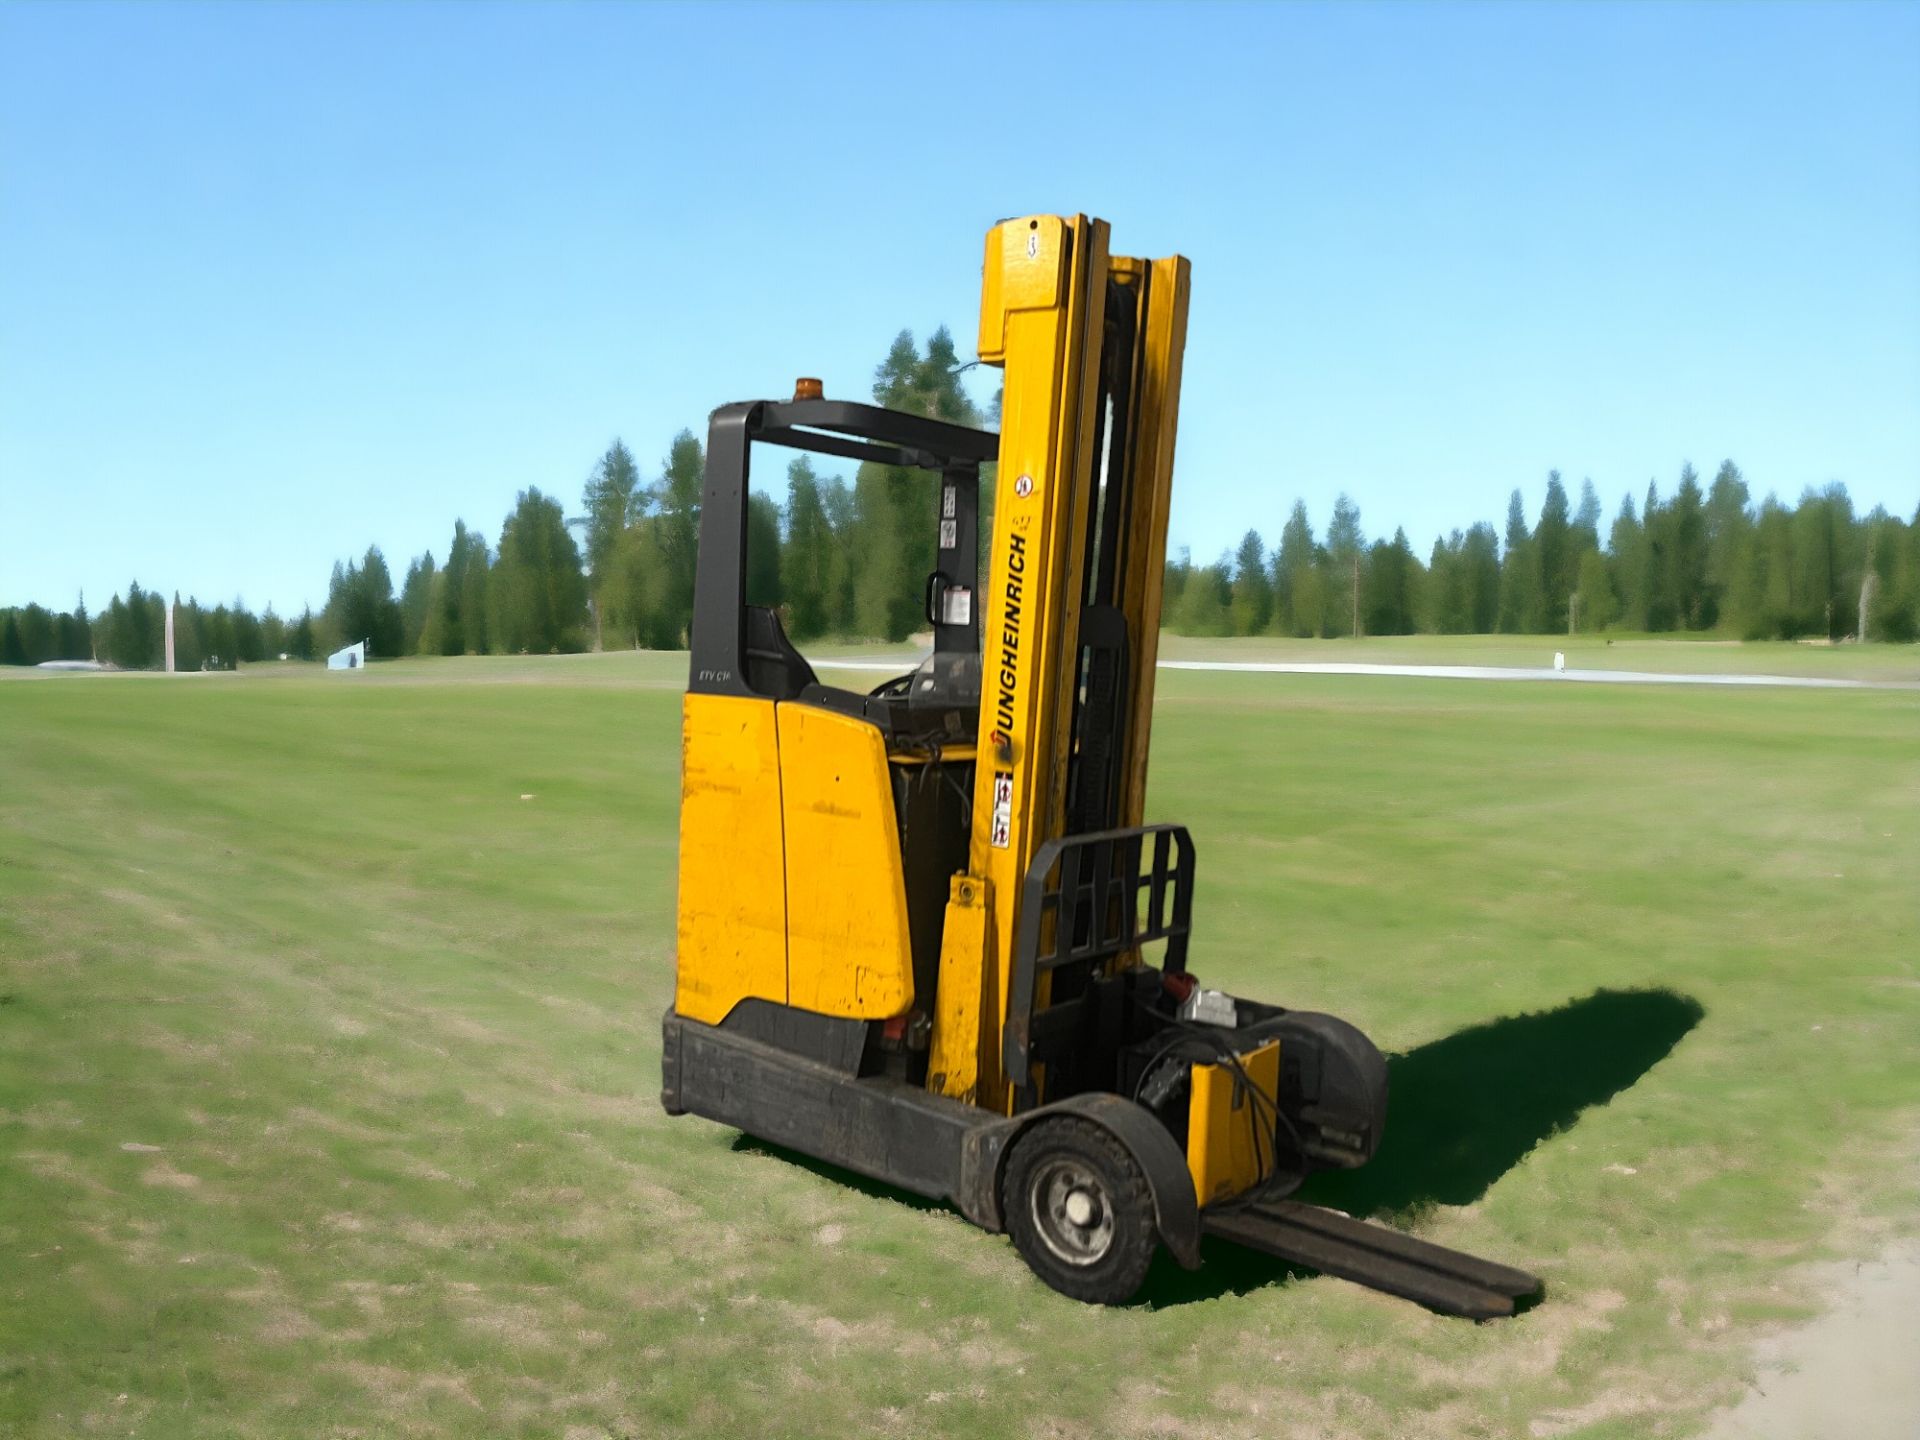 JUNGHEINRICH REACH TRUCK ETVC 16: POWERFUL ELECTRIC WORKHORSE WITH LOW HOURS **(INCLUDES CHARGER)** - Image 3 of 6